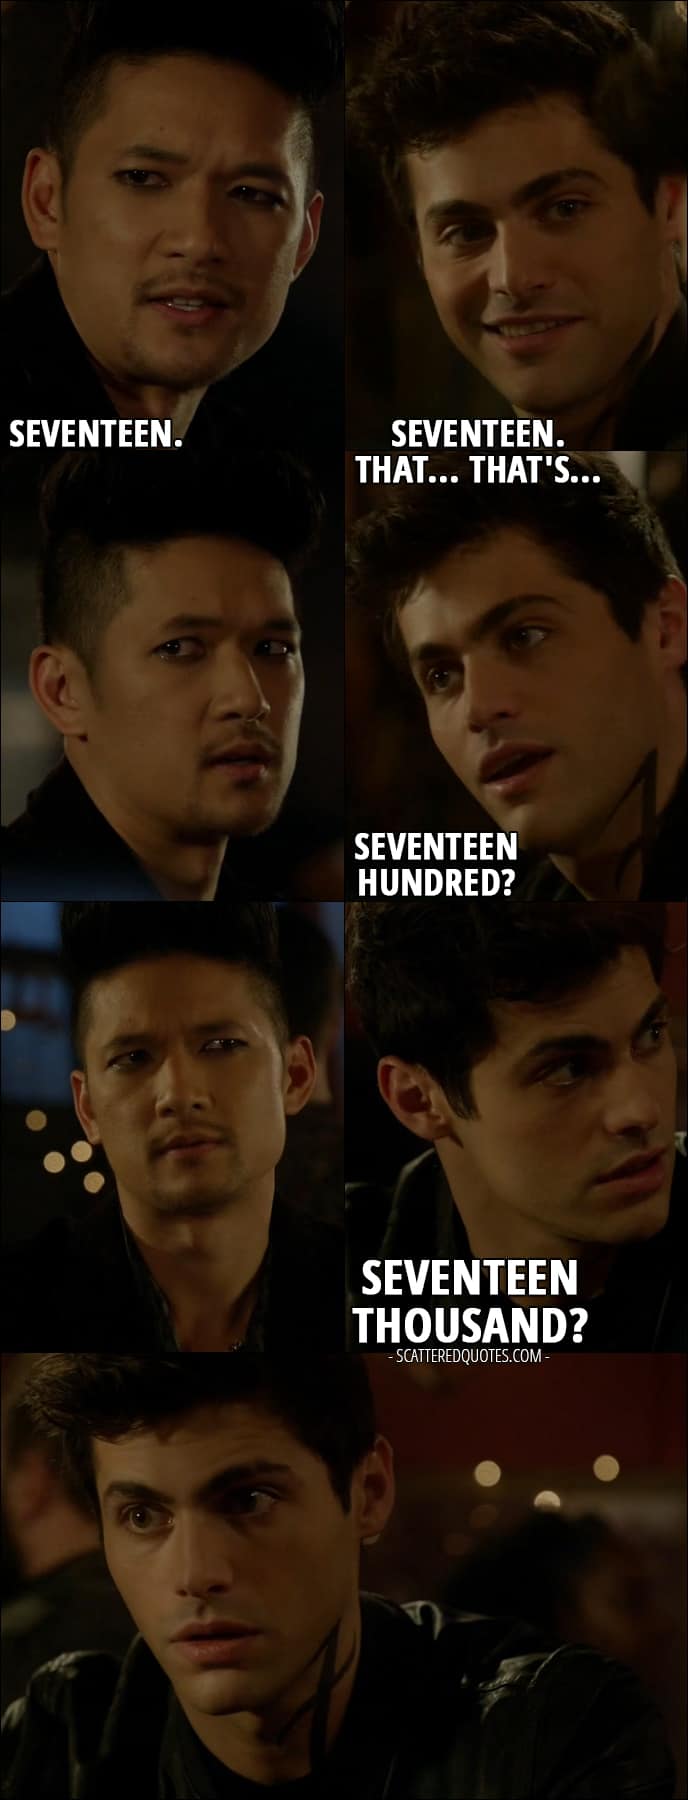 Shadowhunters Quotes from 'Iron Sisters' (2x06) - Alec Lightwood: How many? You can round down if you want. Magnus Bane: Okay. If you wanna know, I'll tell you. Seventeen. Alec Lightwood: Seventeen. That... that's... Seventeen... hundred? Seventeen thousand?